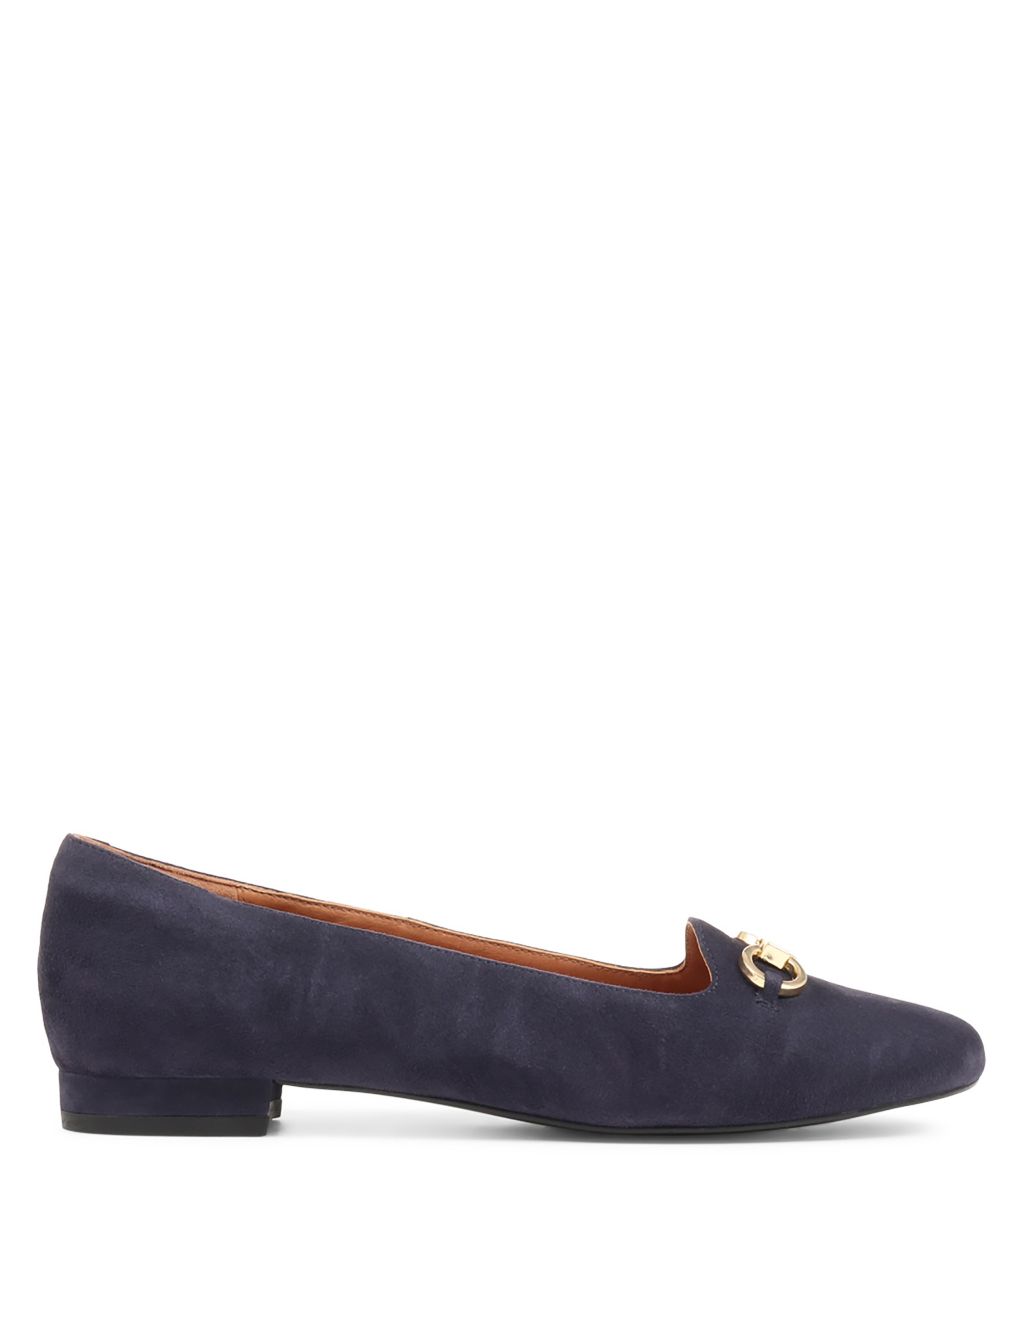 Suede Buckle Flat Loafers image 5